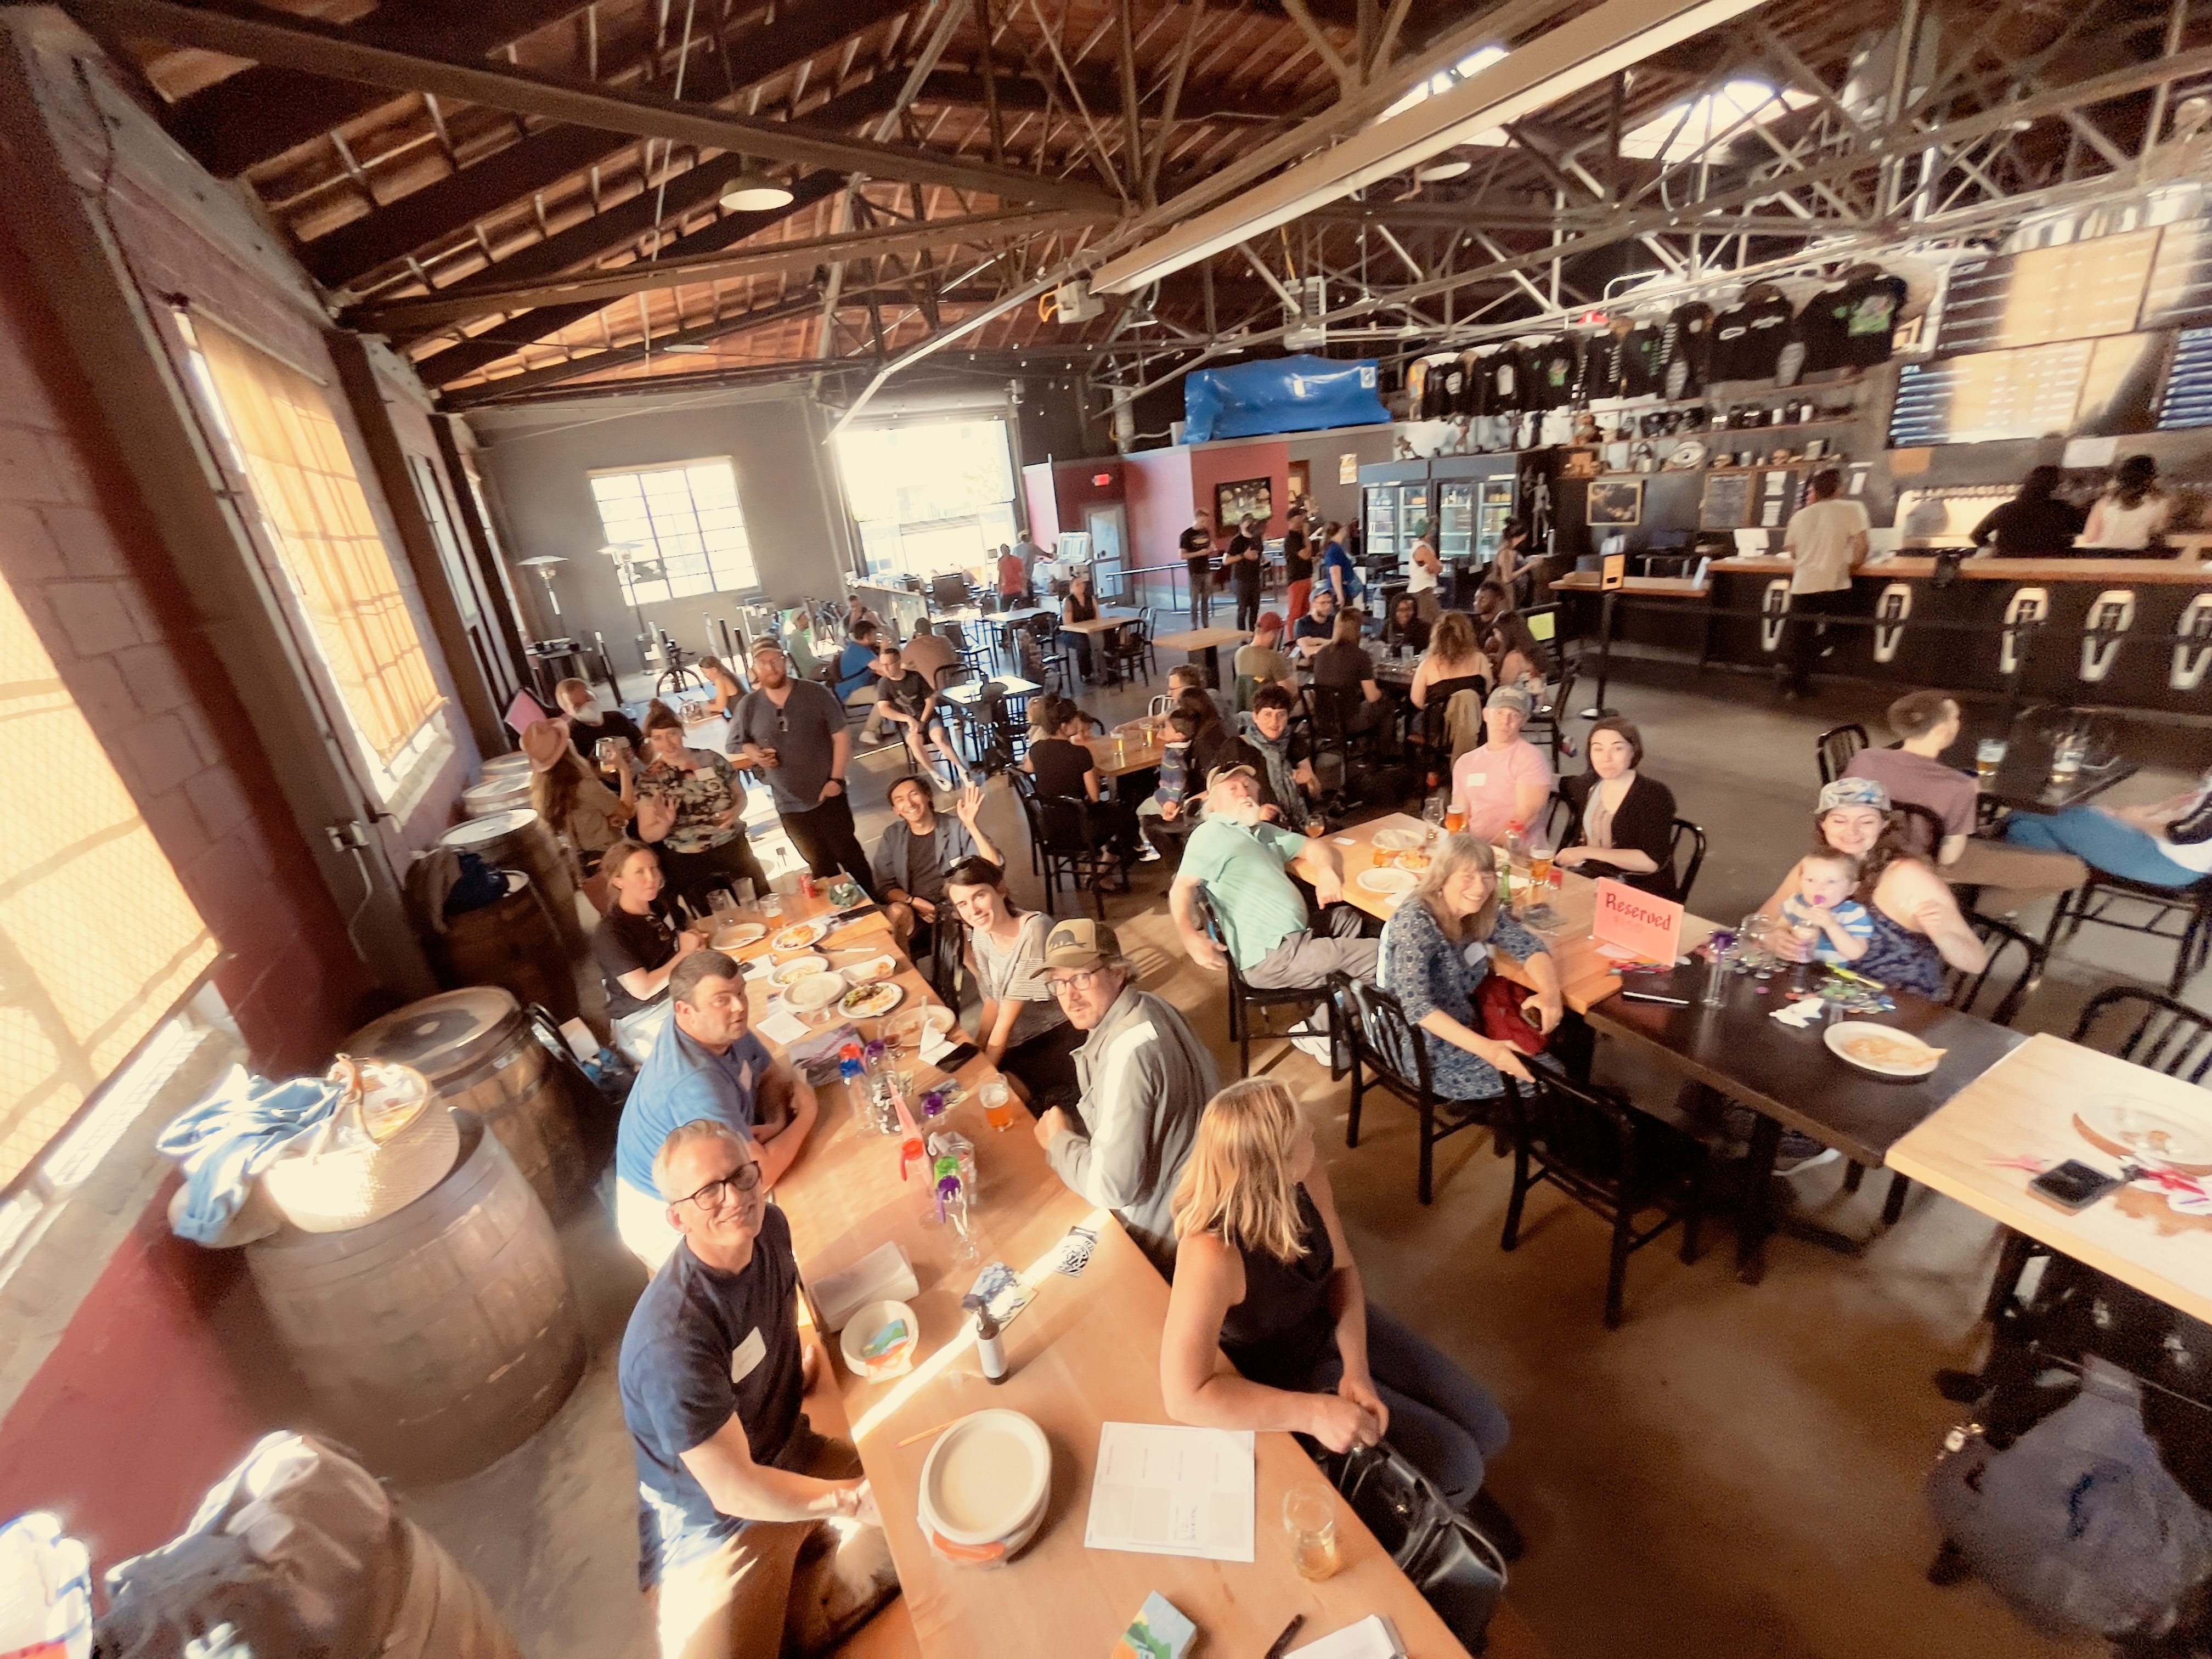 A crowd of people in a brewery restaurant